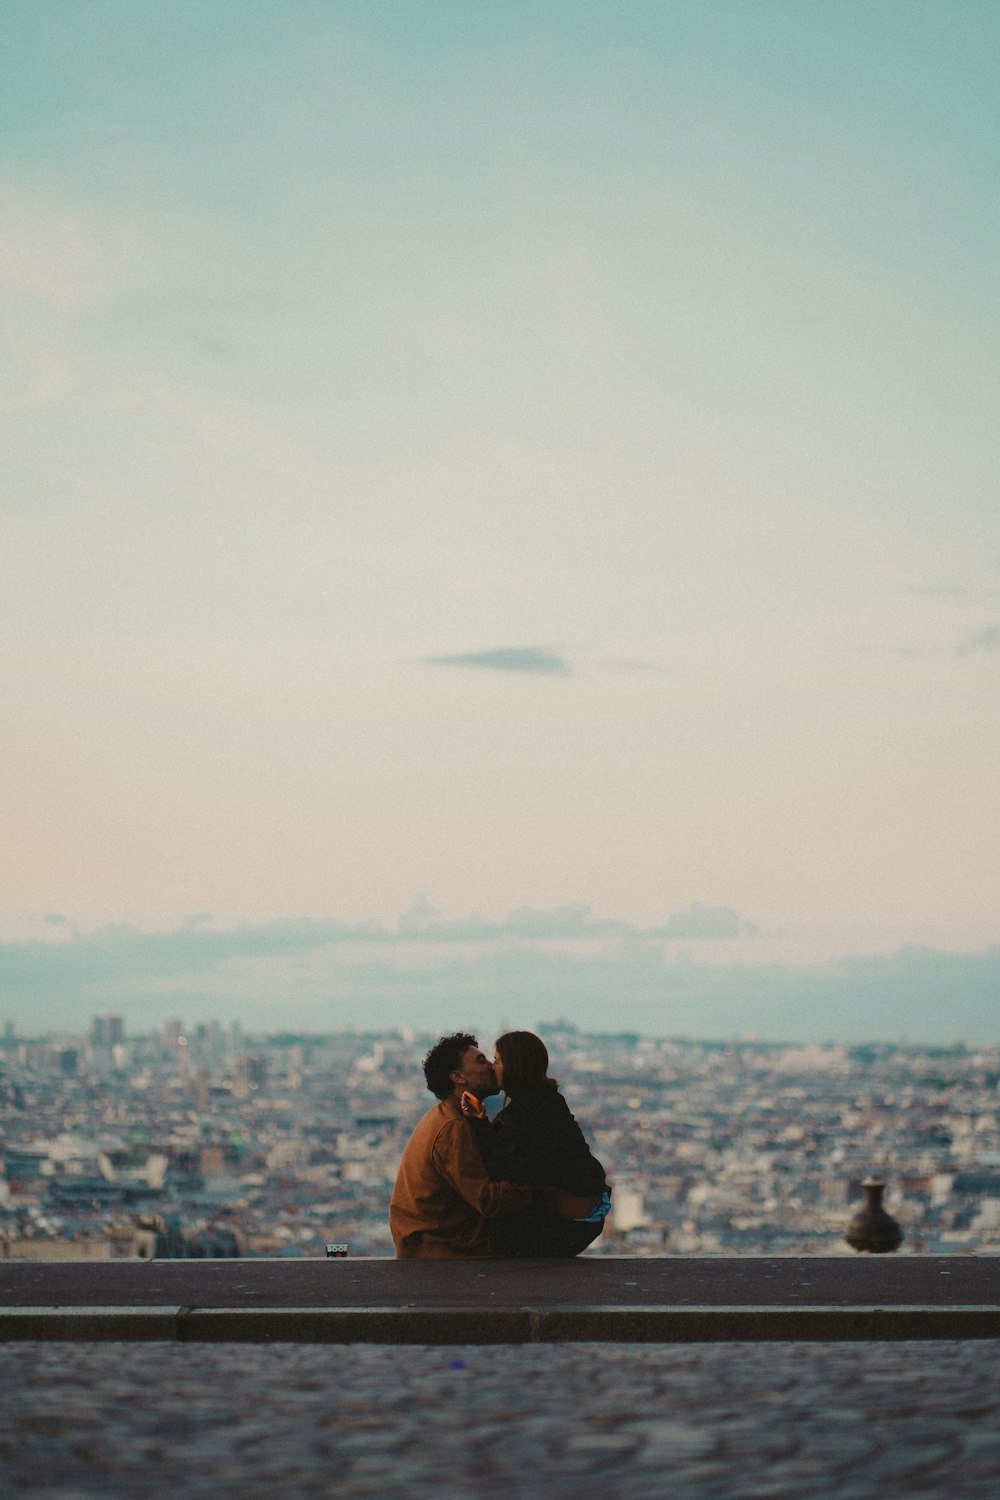 a man and woman kissing on a ledge overlooking a city